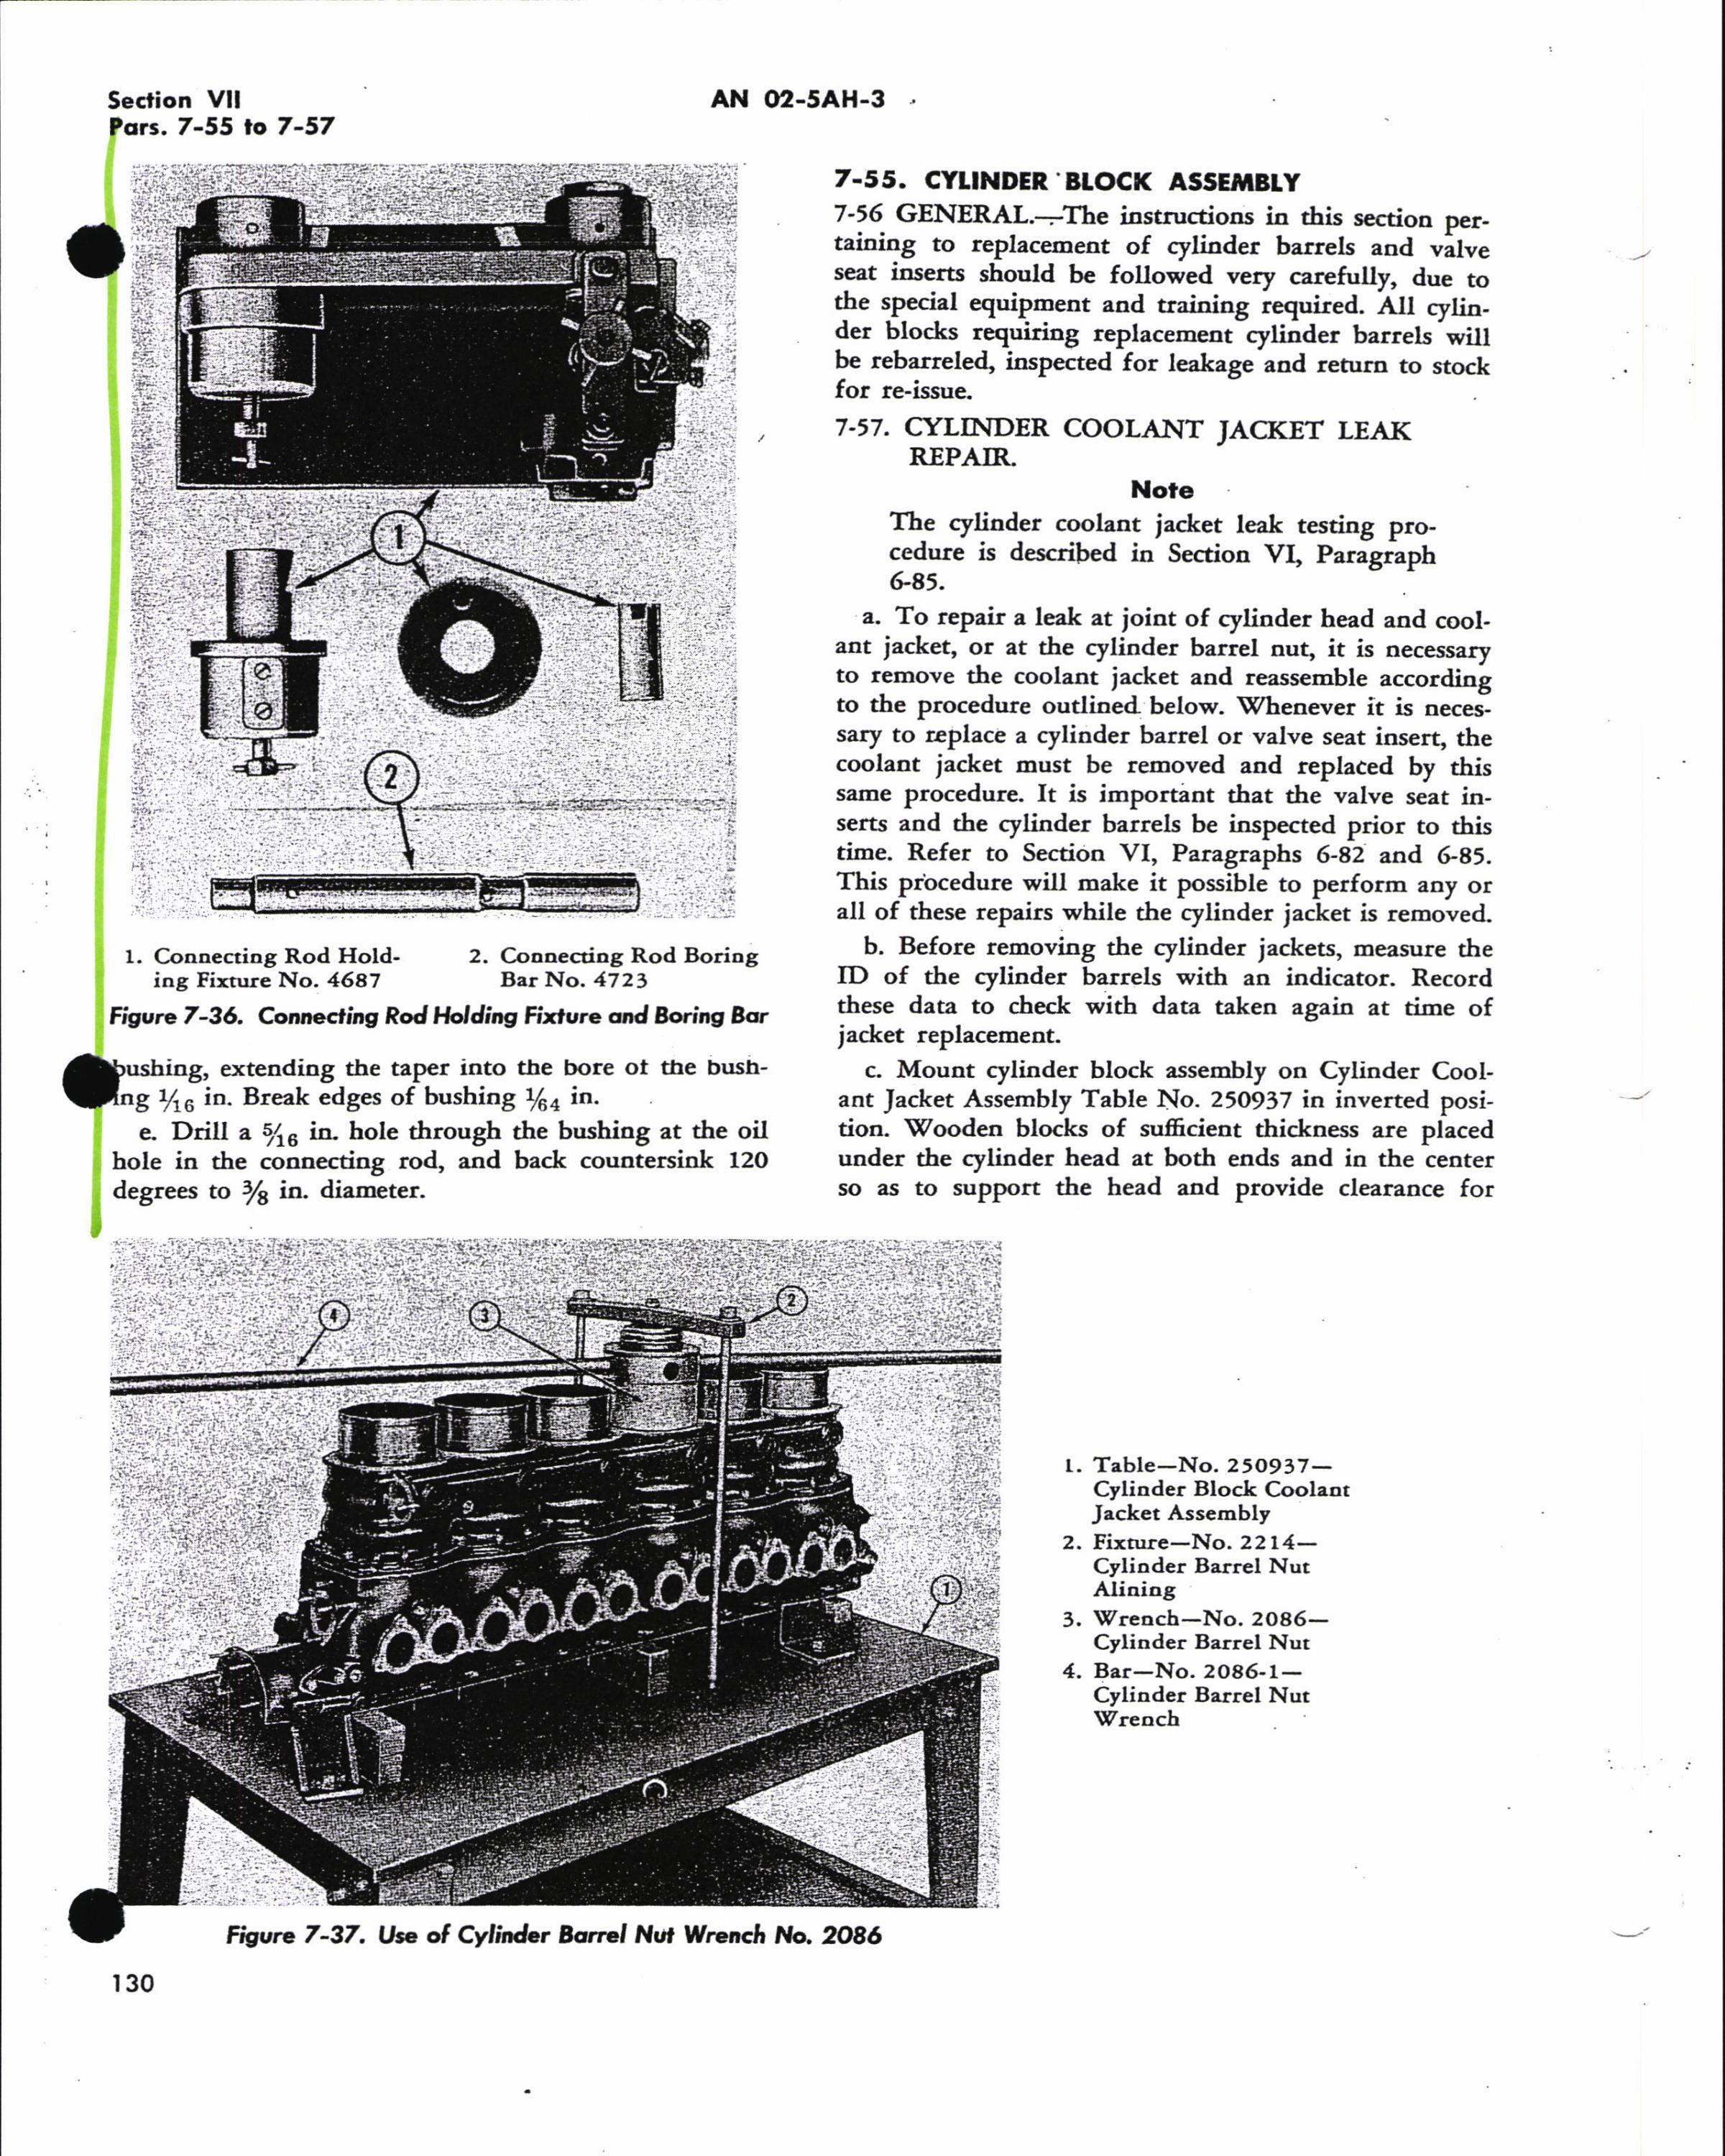 Sample page 2 from AirCorps Library document: Crankshaft Excerpt: From V-1710-143, -145 Overhaul Instructions 